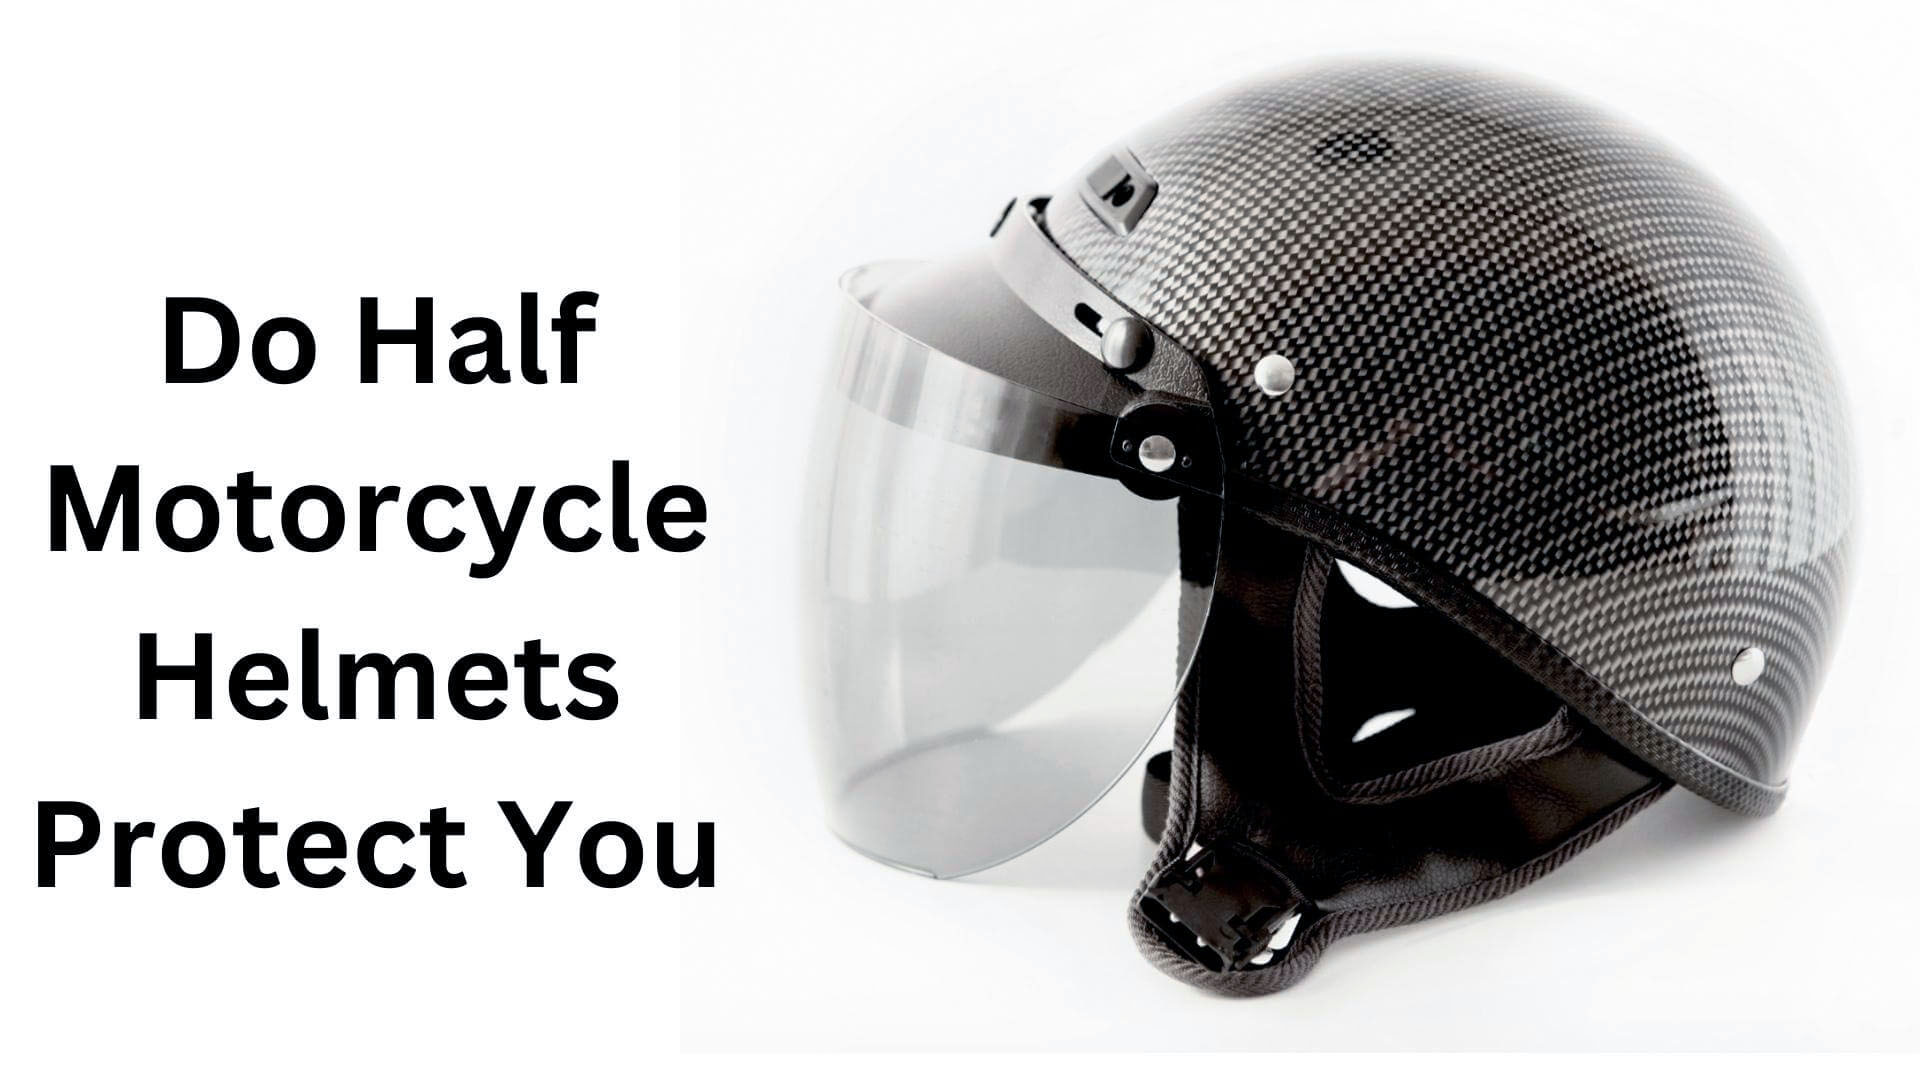 Do half motorcycle helmets protect you?